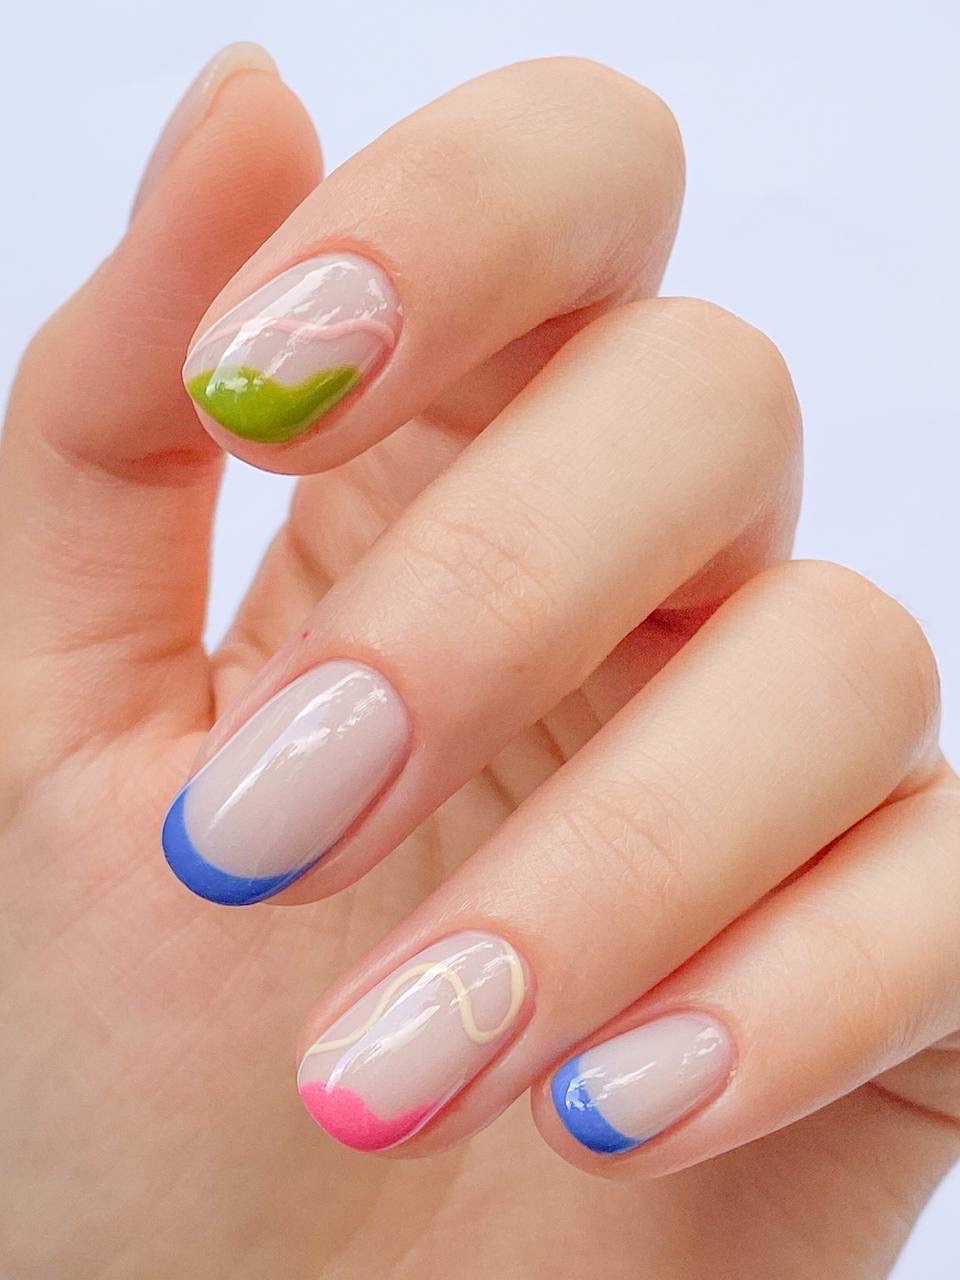 Colorful French manicure